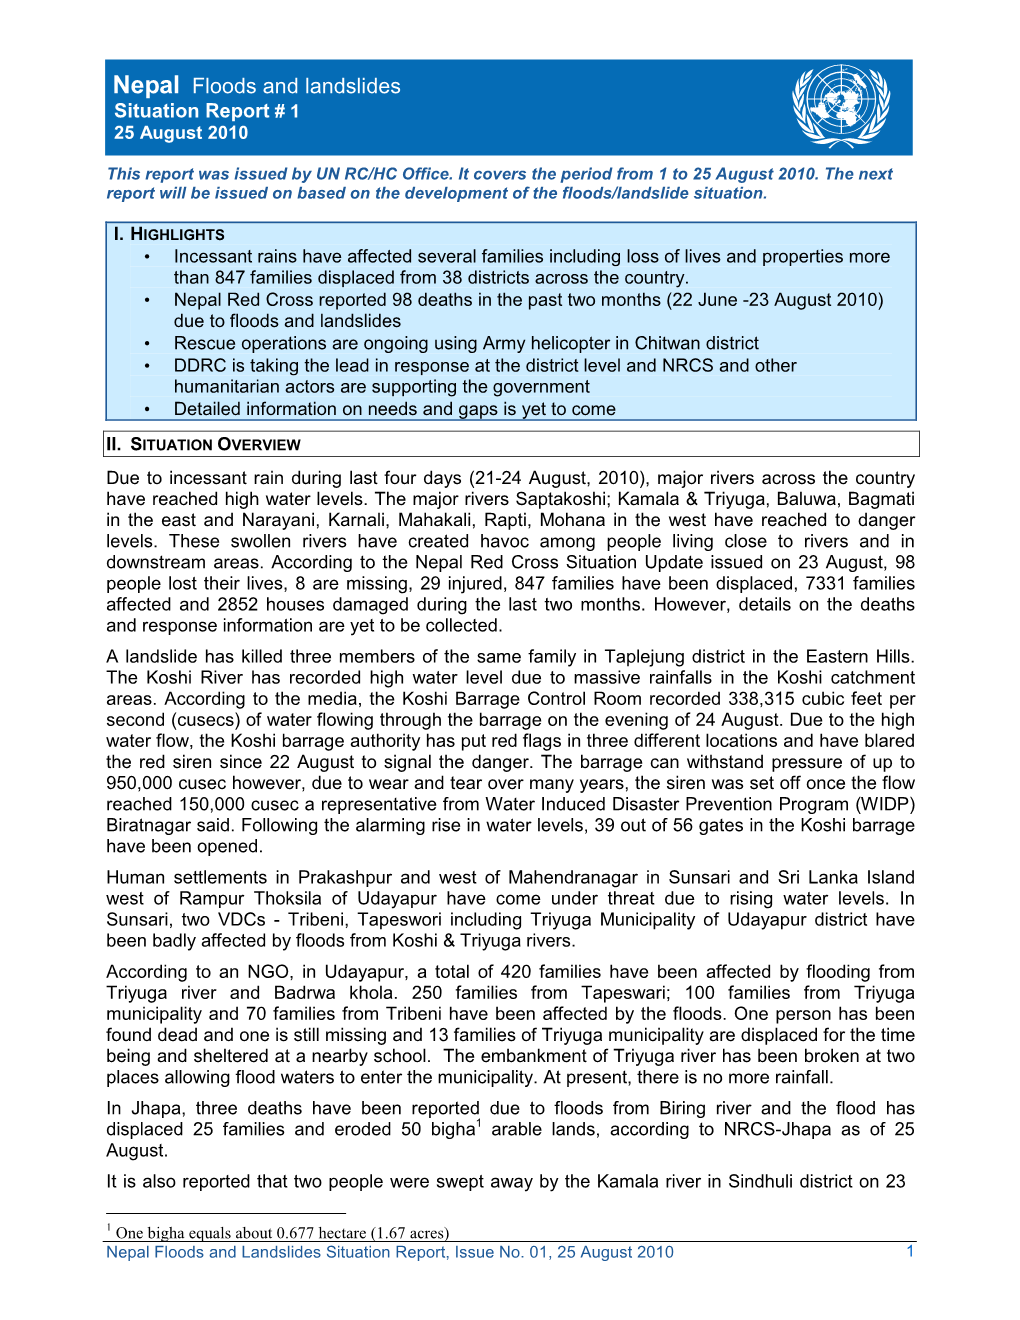 Nepal Floods and Landslides Situation Report # 1 25 August 2010